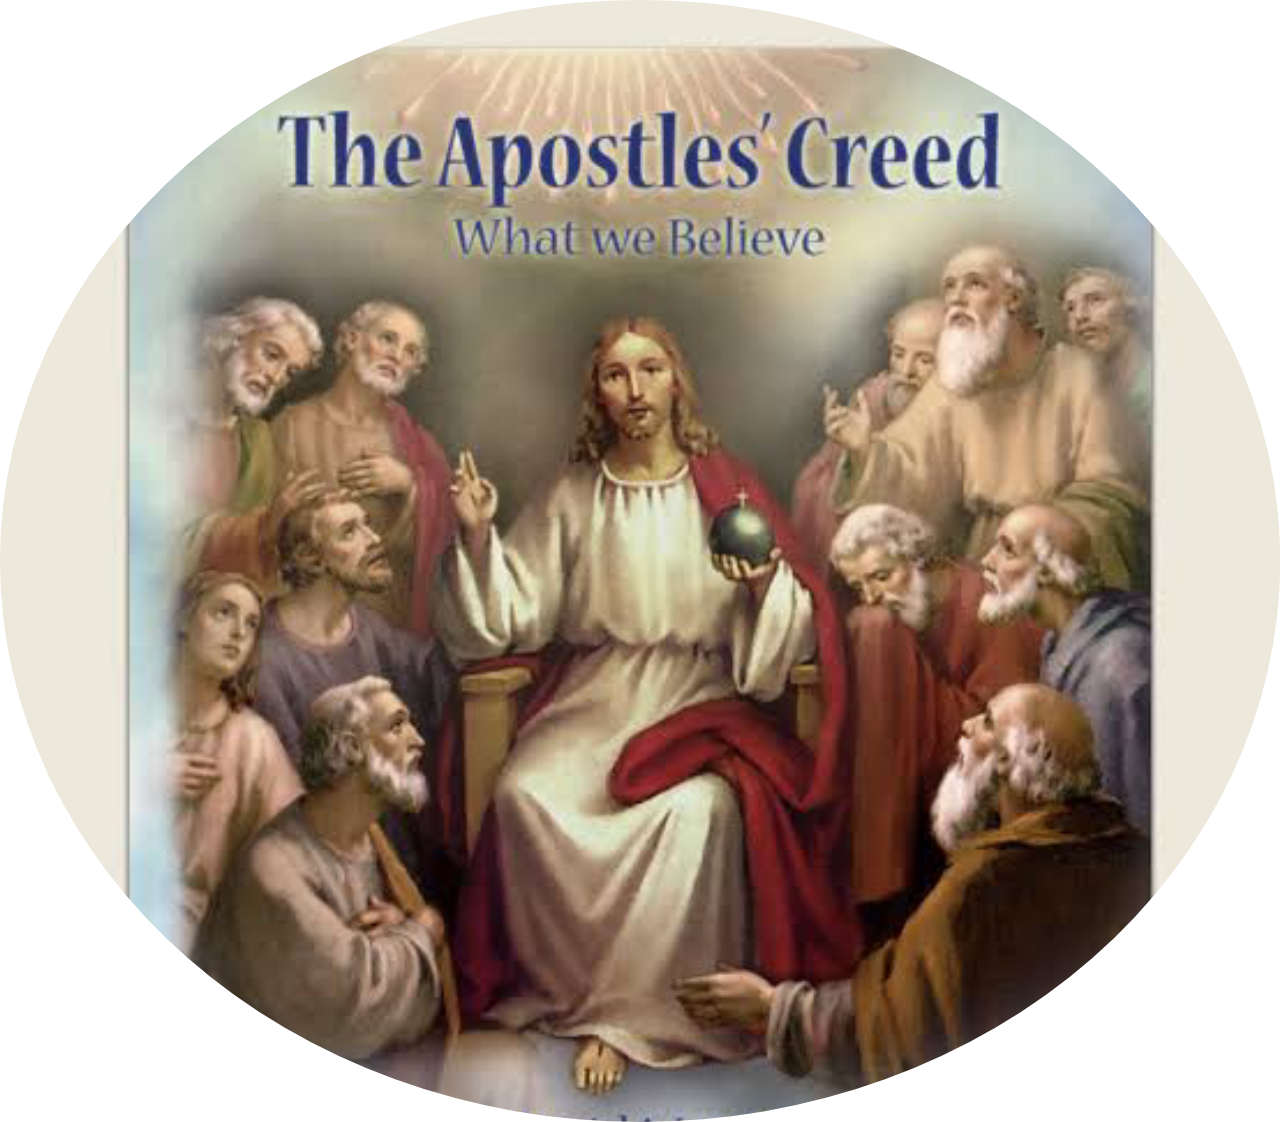 What is the difference between the Apostles' Creed and the Nicene Creed?